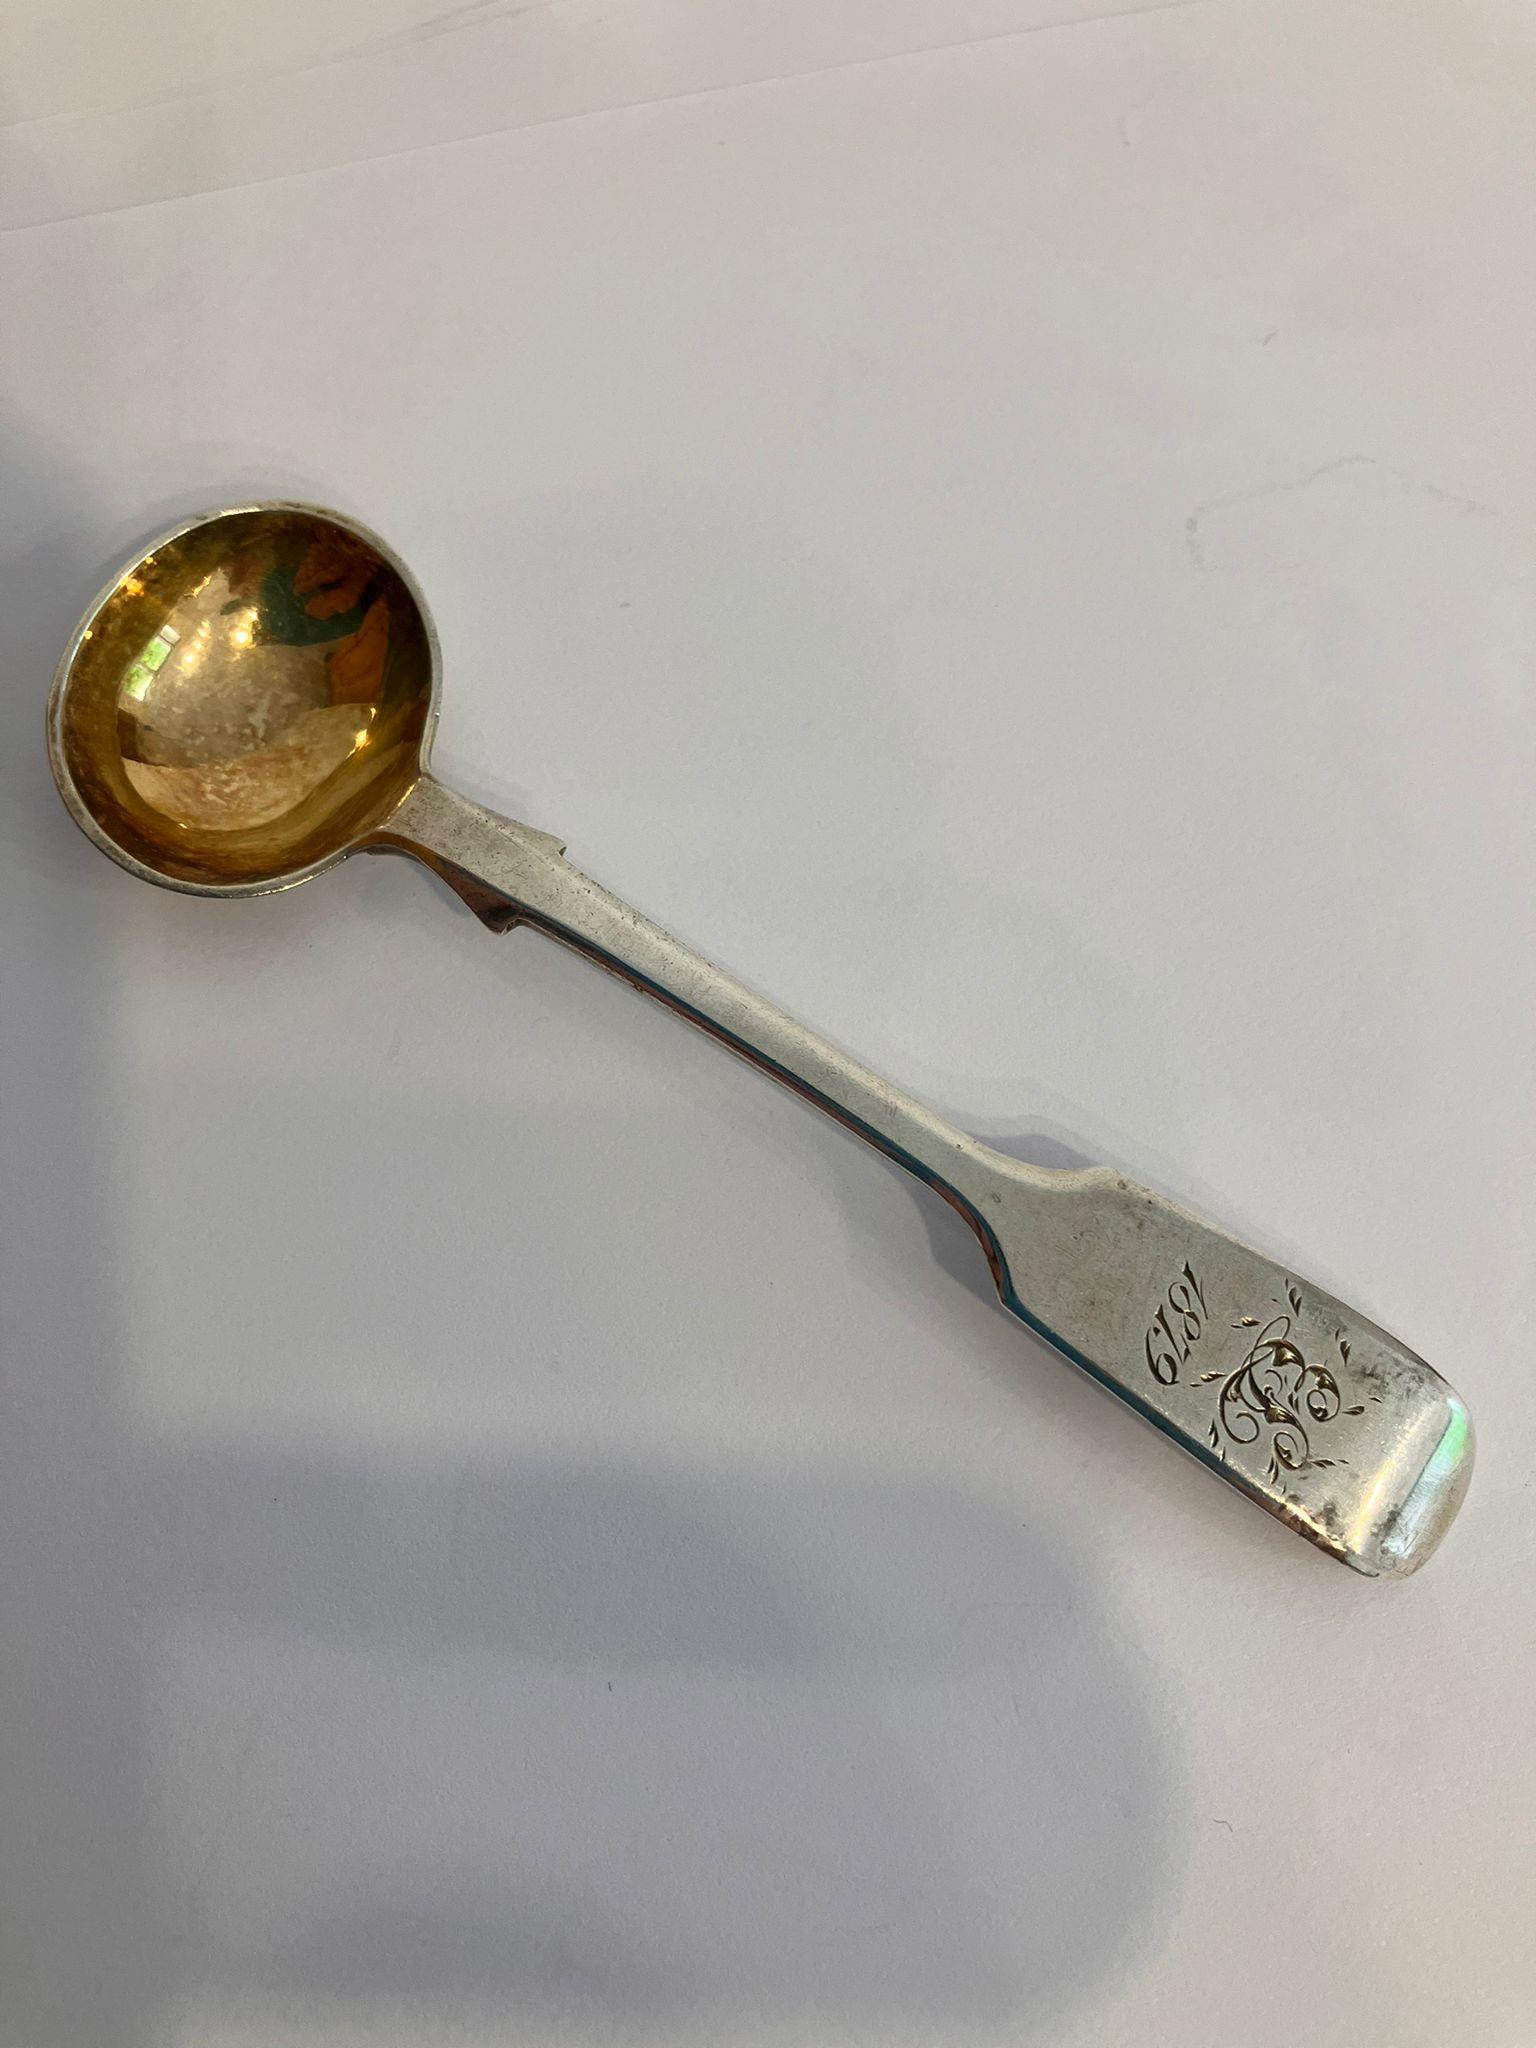 Antique SILVER CONDIMENT SPOON with Gilded Bowl. Clear hallmark for John Stone Exeter 1846. - Image 2 of 4